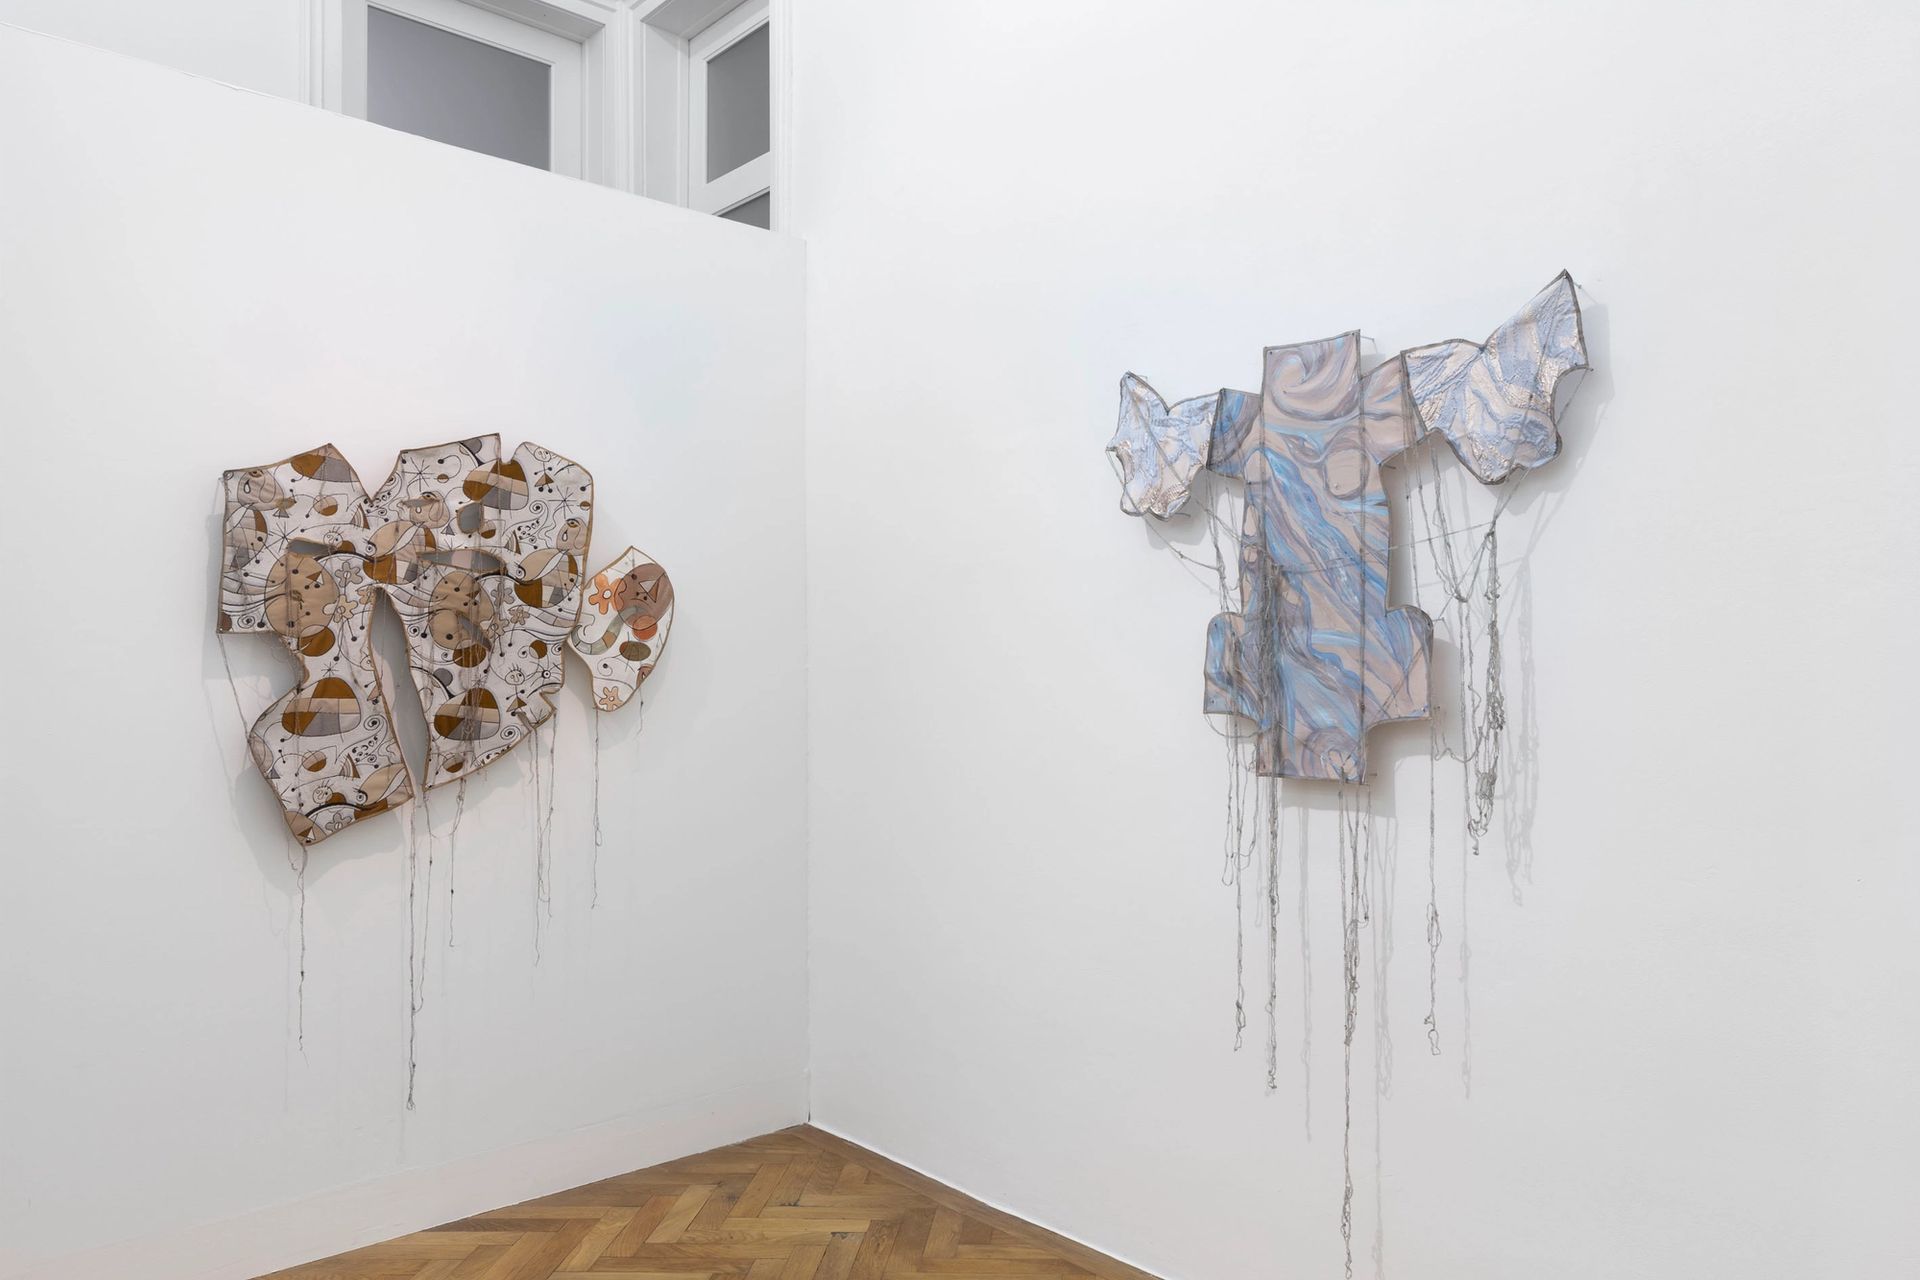 From left: Bezaubernde Jeannie, 2021, Industrial textiles and copies of the patterns painted by hand, 105 × 108 cm
/
Poularde auf Silbertablett, 2021, Industrial textiles and copies of the patterns painted by hand, 88 × 115 cm